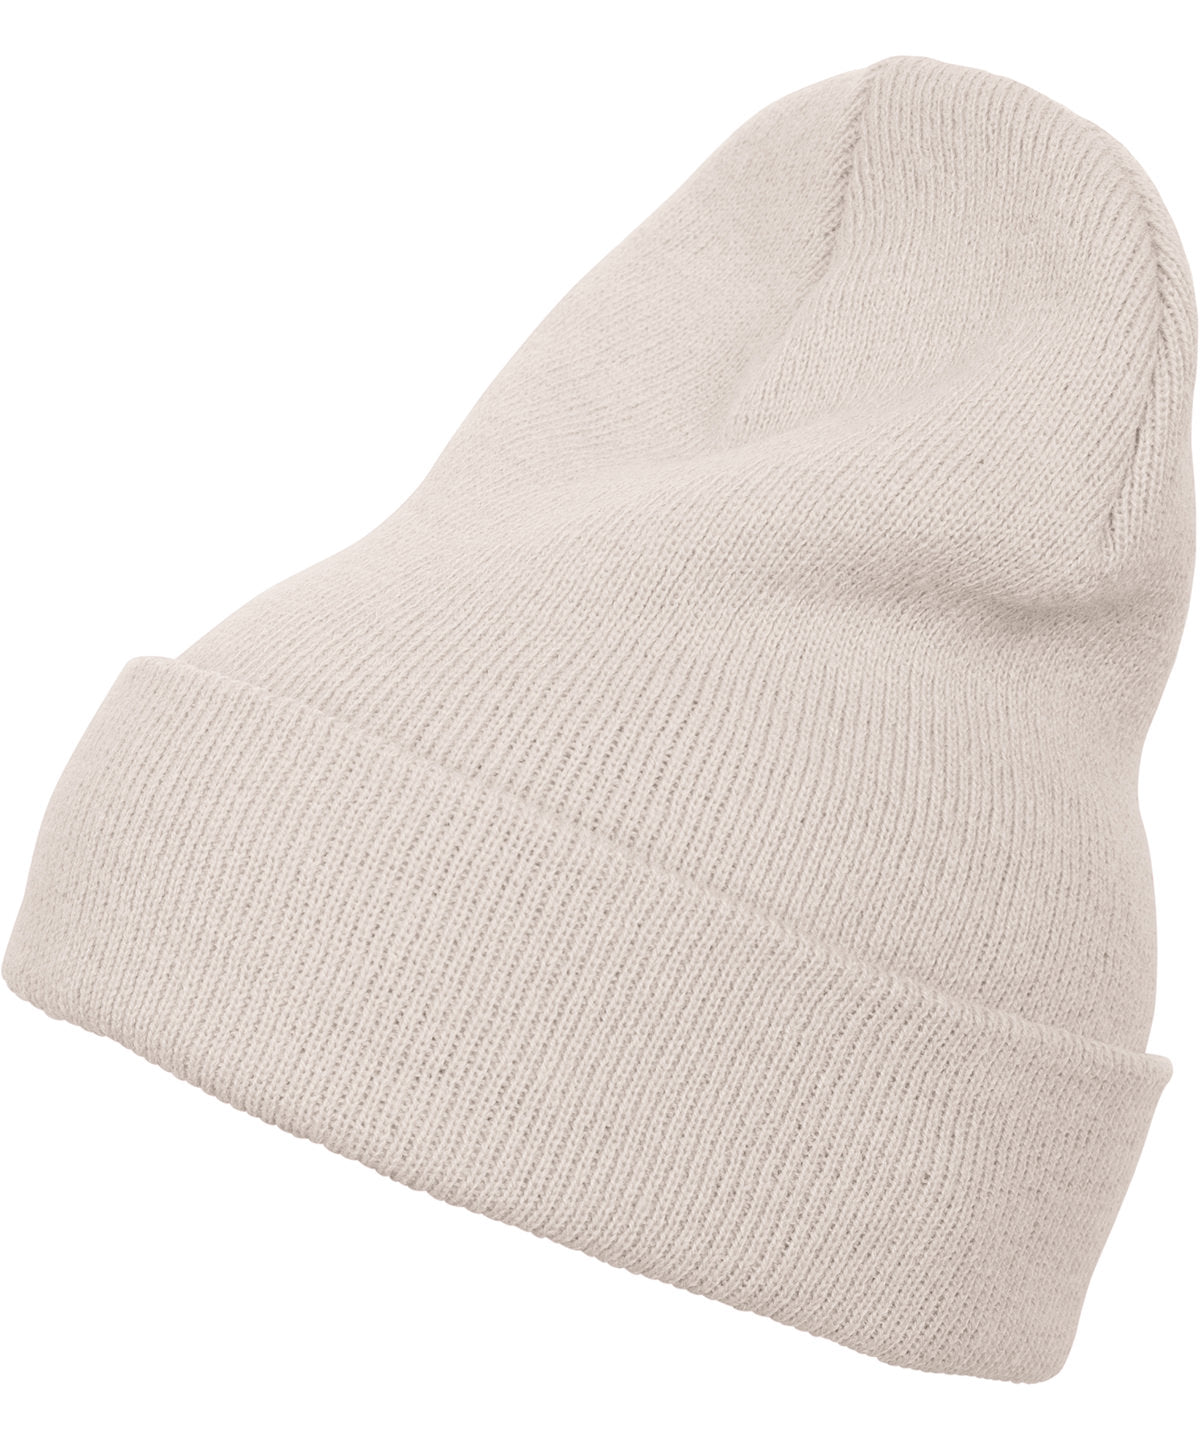 White Sand - Heavyweight long beanie (1501KC) Hats Flexfit by Yupoong Headwear, Must Haves, New Colours for 2023, Winter Essentials Schoolwear Centres